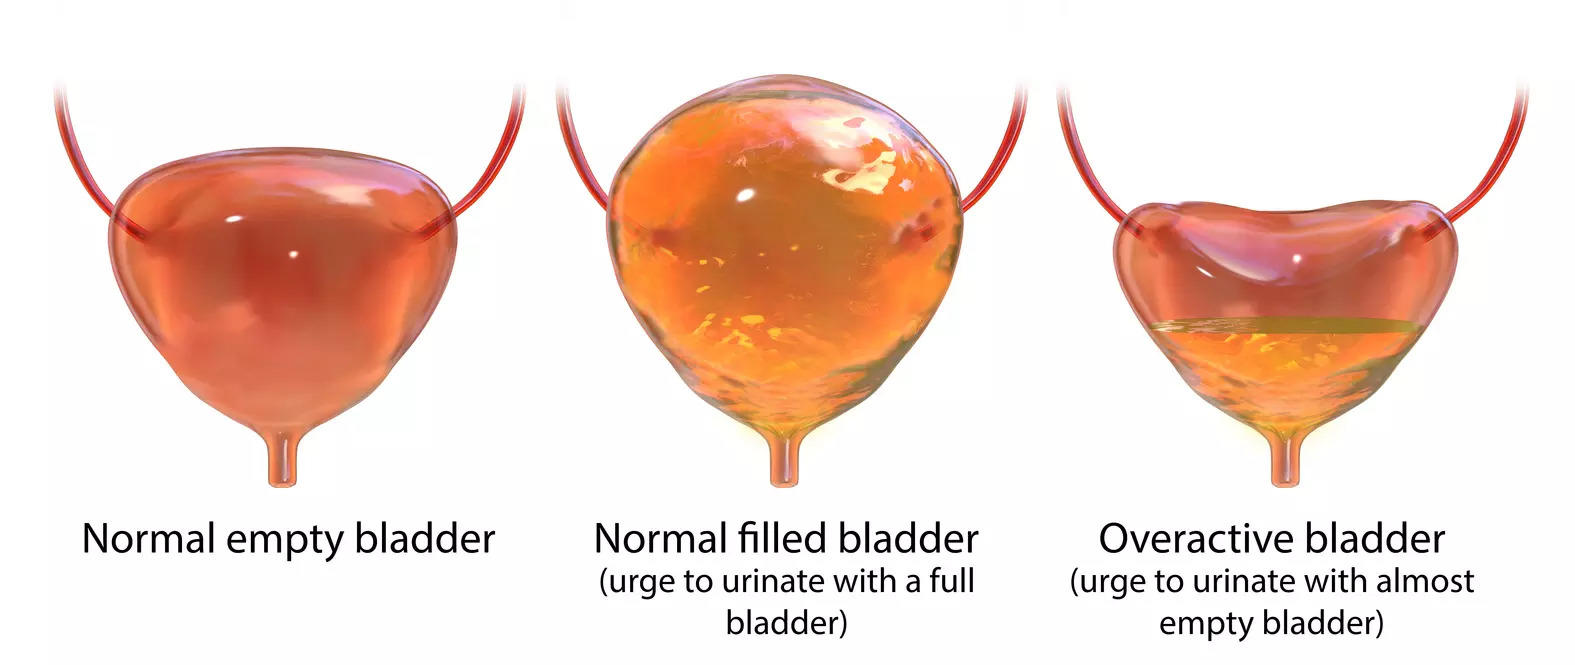 Do you feel a frequent urge to urinate? Warning signs of overactive bladder that you must not miss